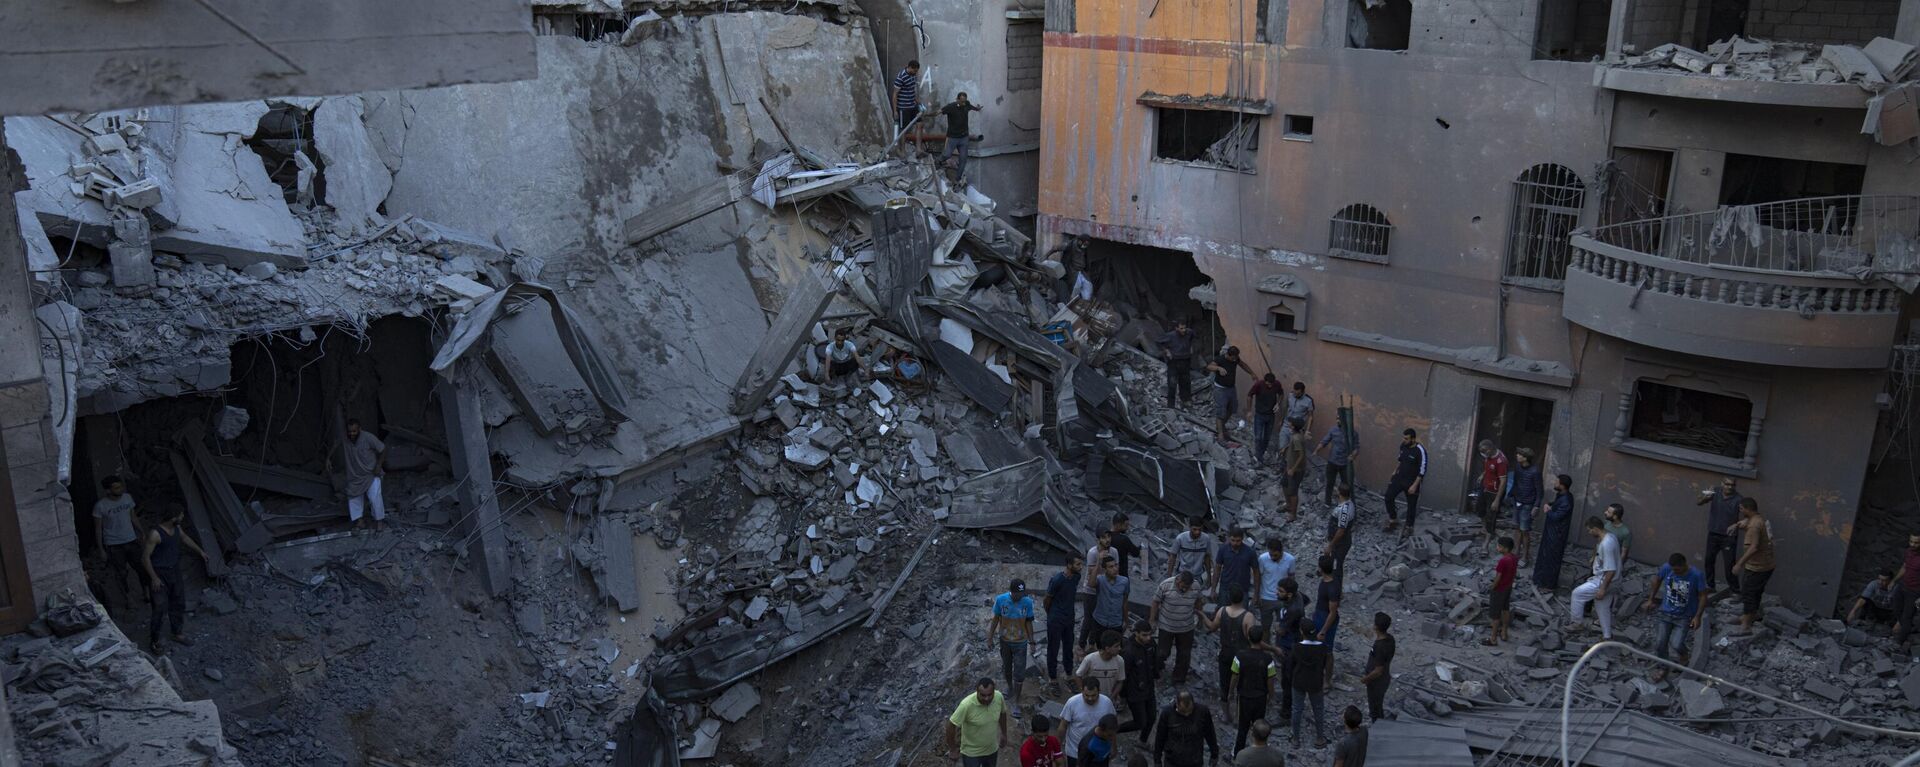 Palestinians search for survivors from a building destroyed in Israeli bombardment in Khan Younis, Gaza Strip, Thursday, Oct. 19, 2023 - Sputnik India, 1920, 19.10.2023